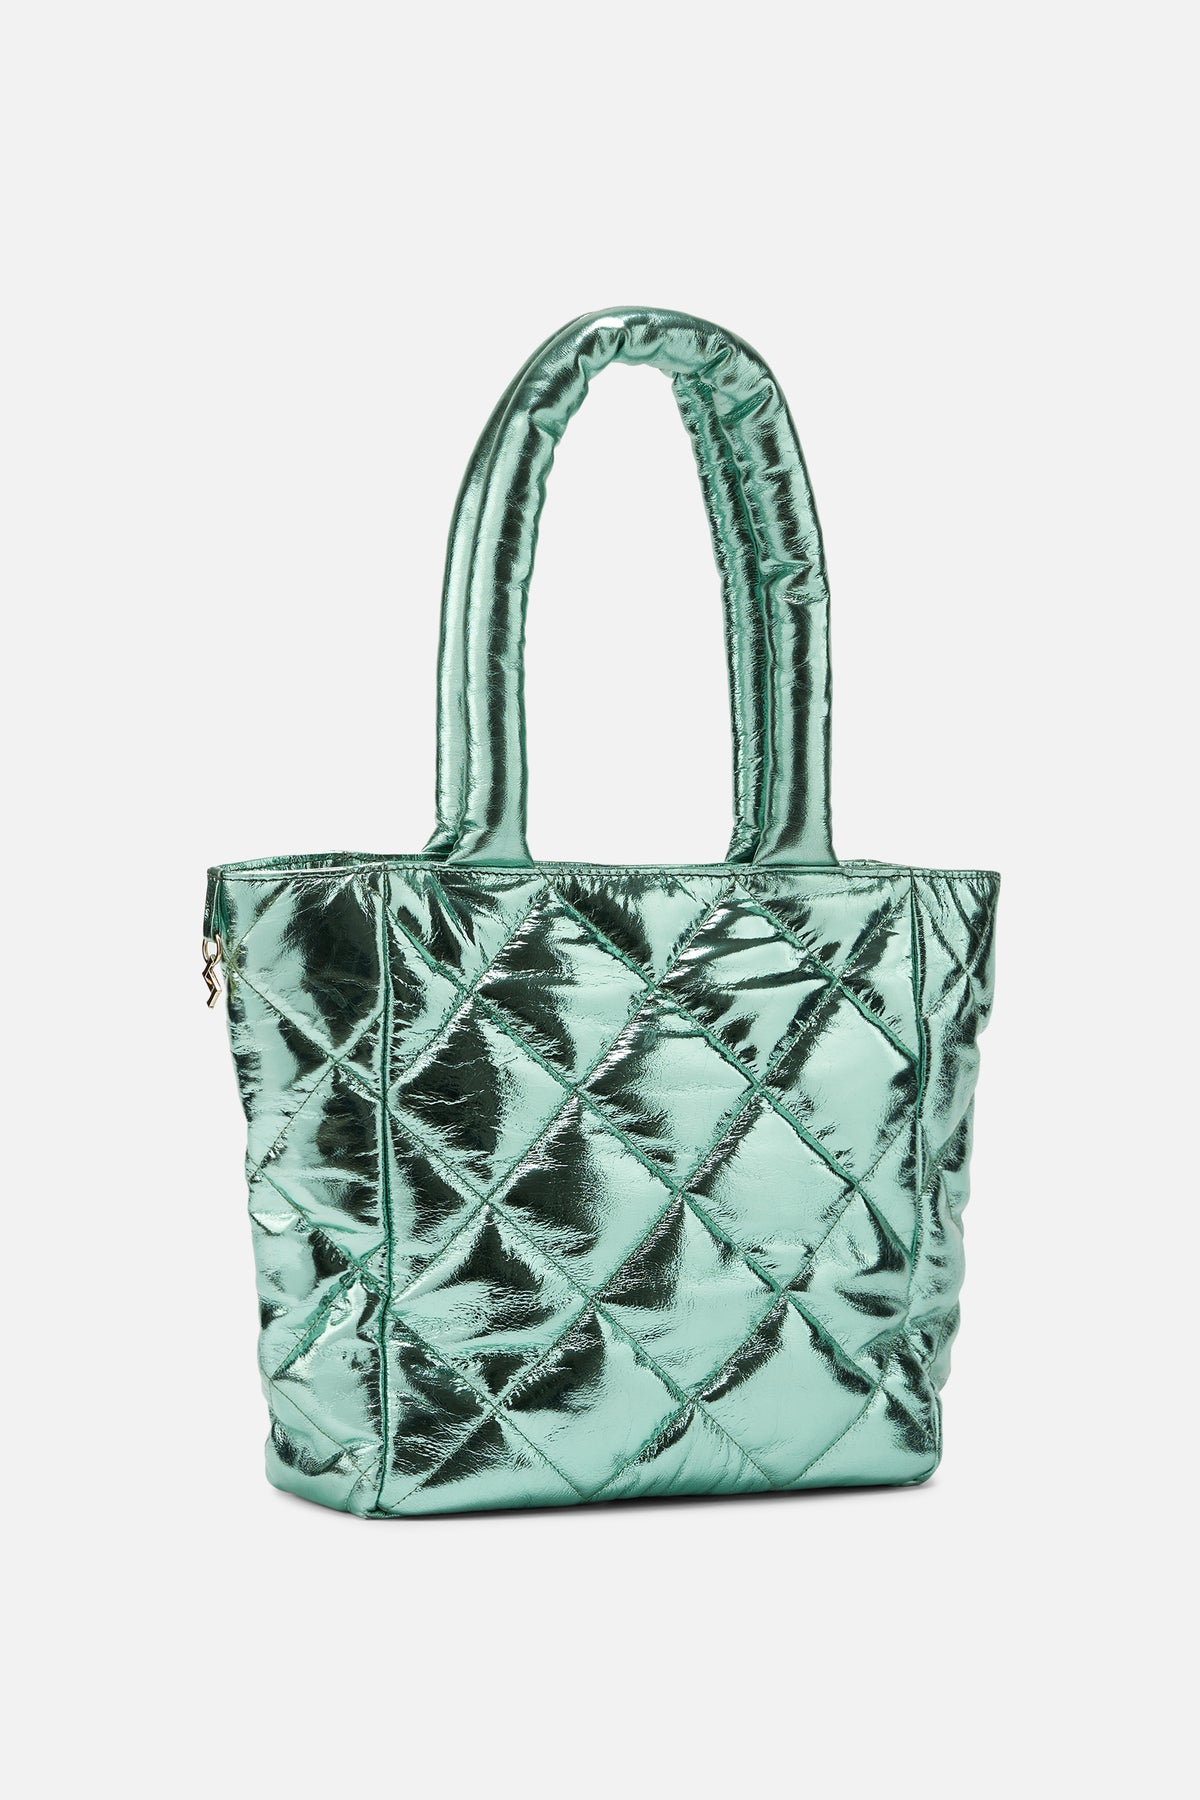 CHANEL Pre-Owned 2006-2008 diamond-quilted metallic tote bag | Smart Closet